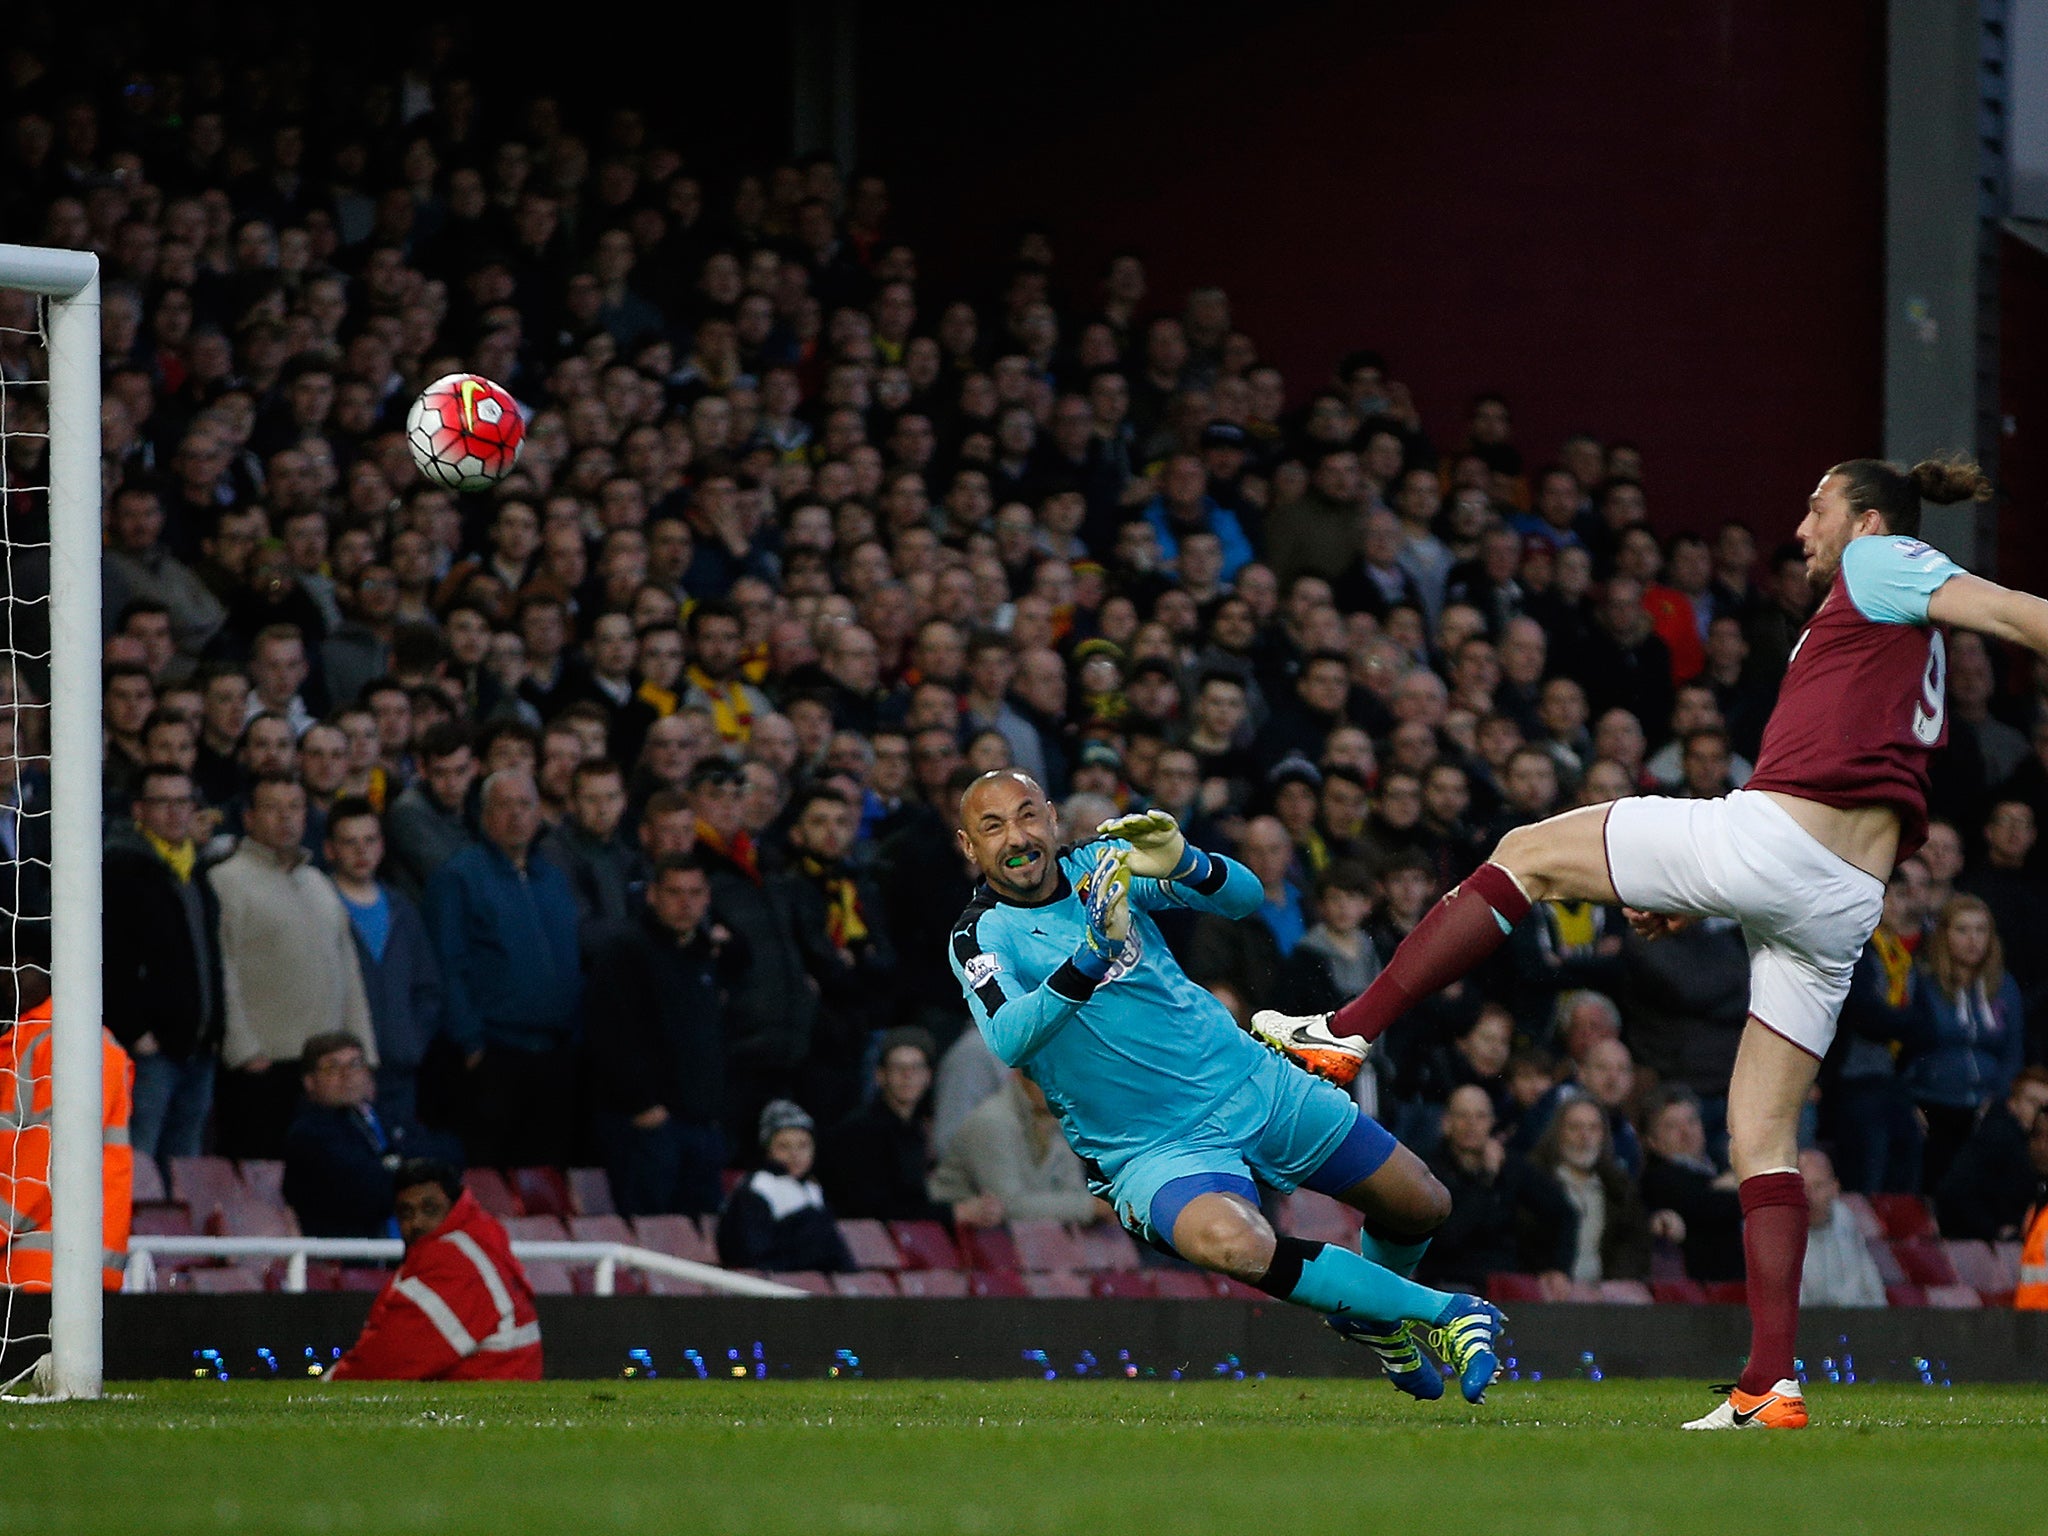 Andy Carroll scores the opening goal for West Ham